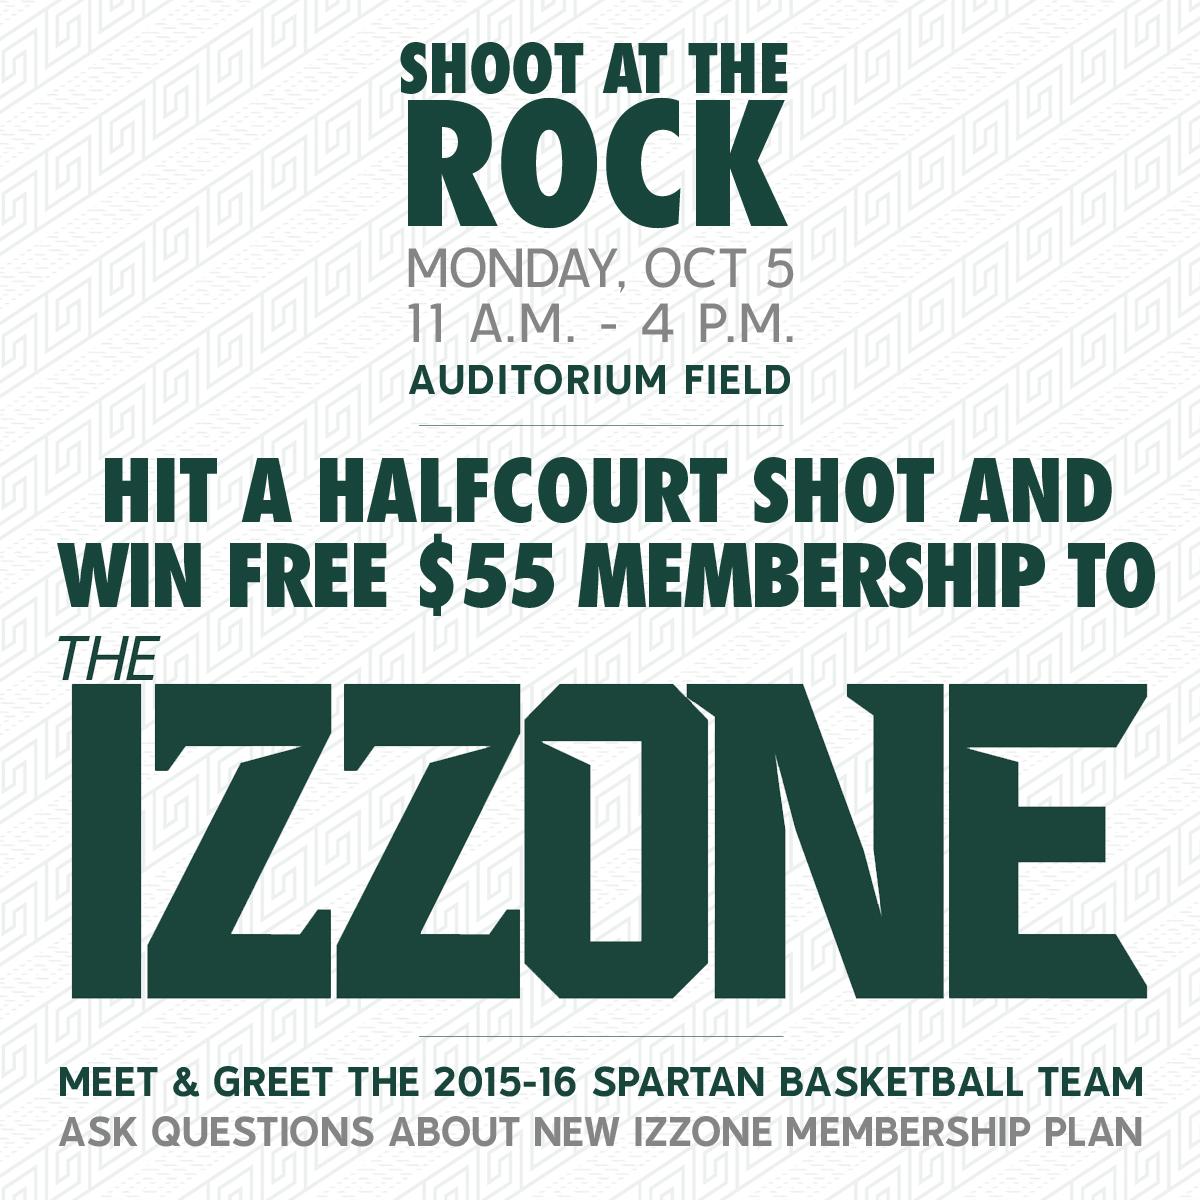 Make a halfcourt shot to win free Izzone tickets, today from 11 to 4 CQjZ6NCXAAAfJ12